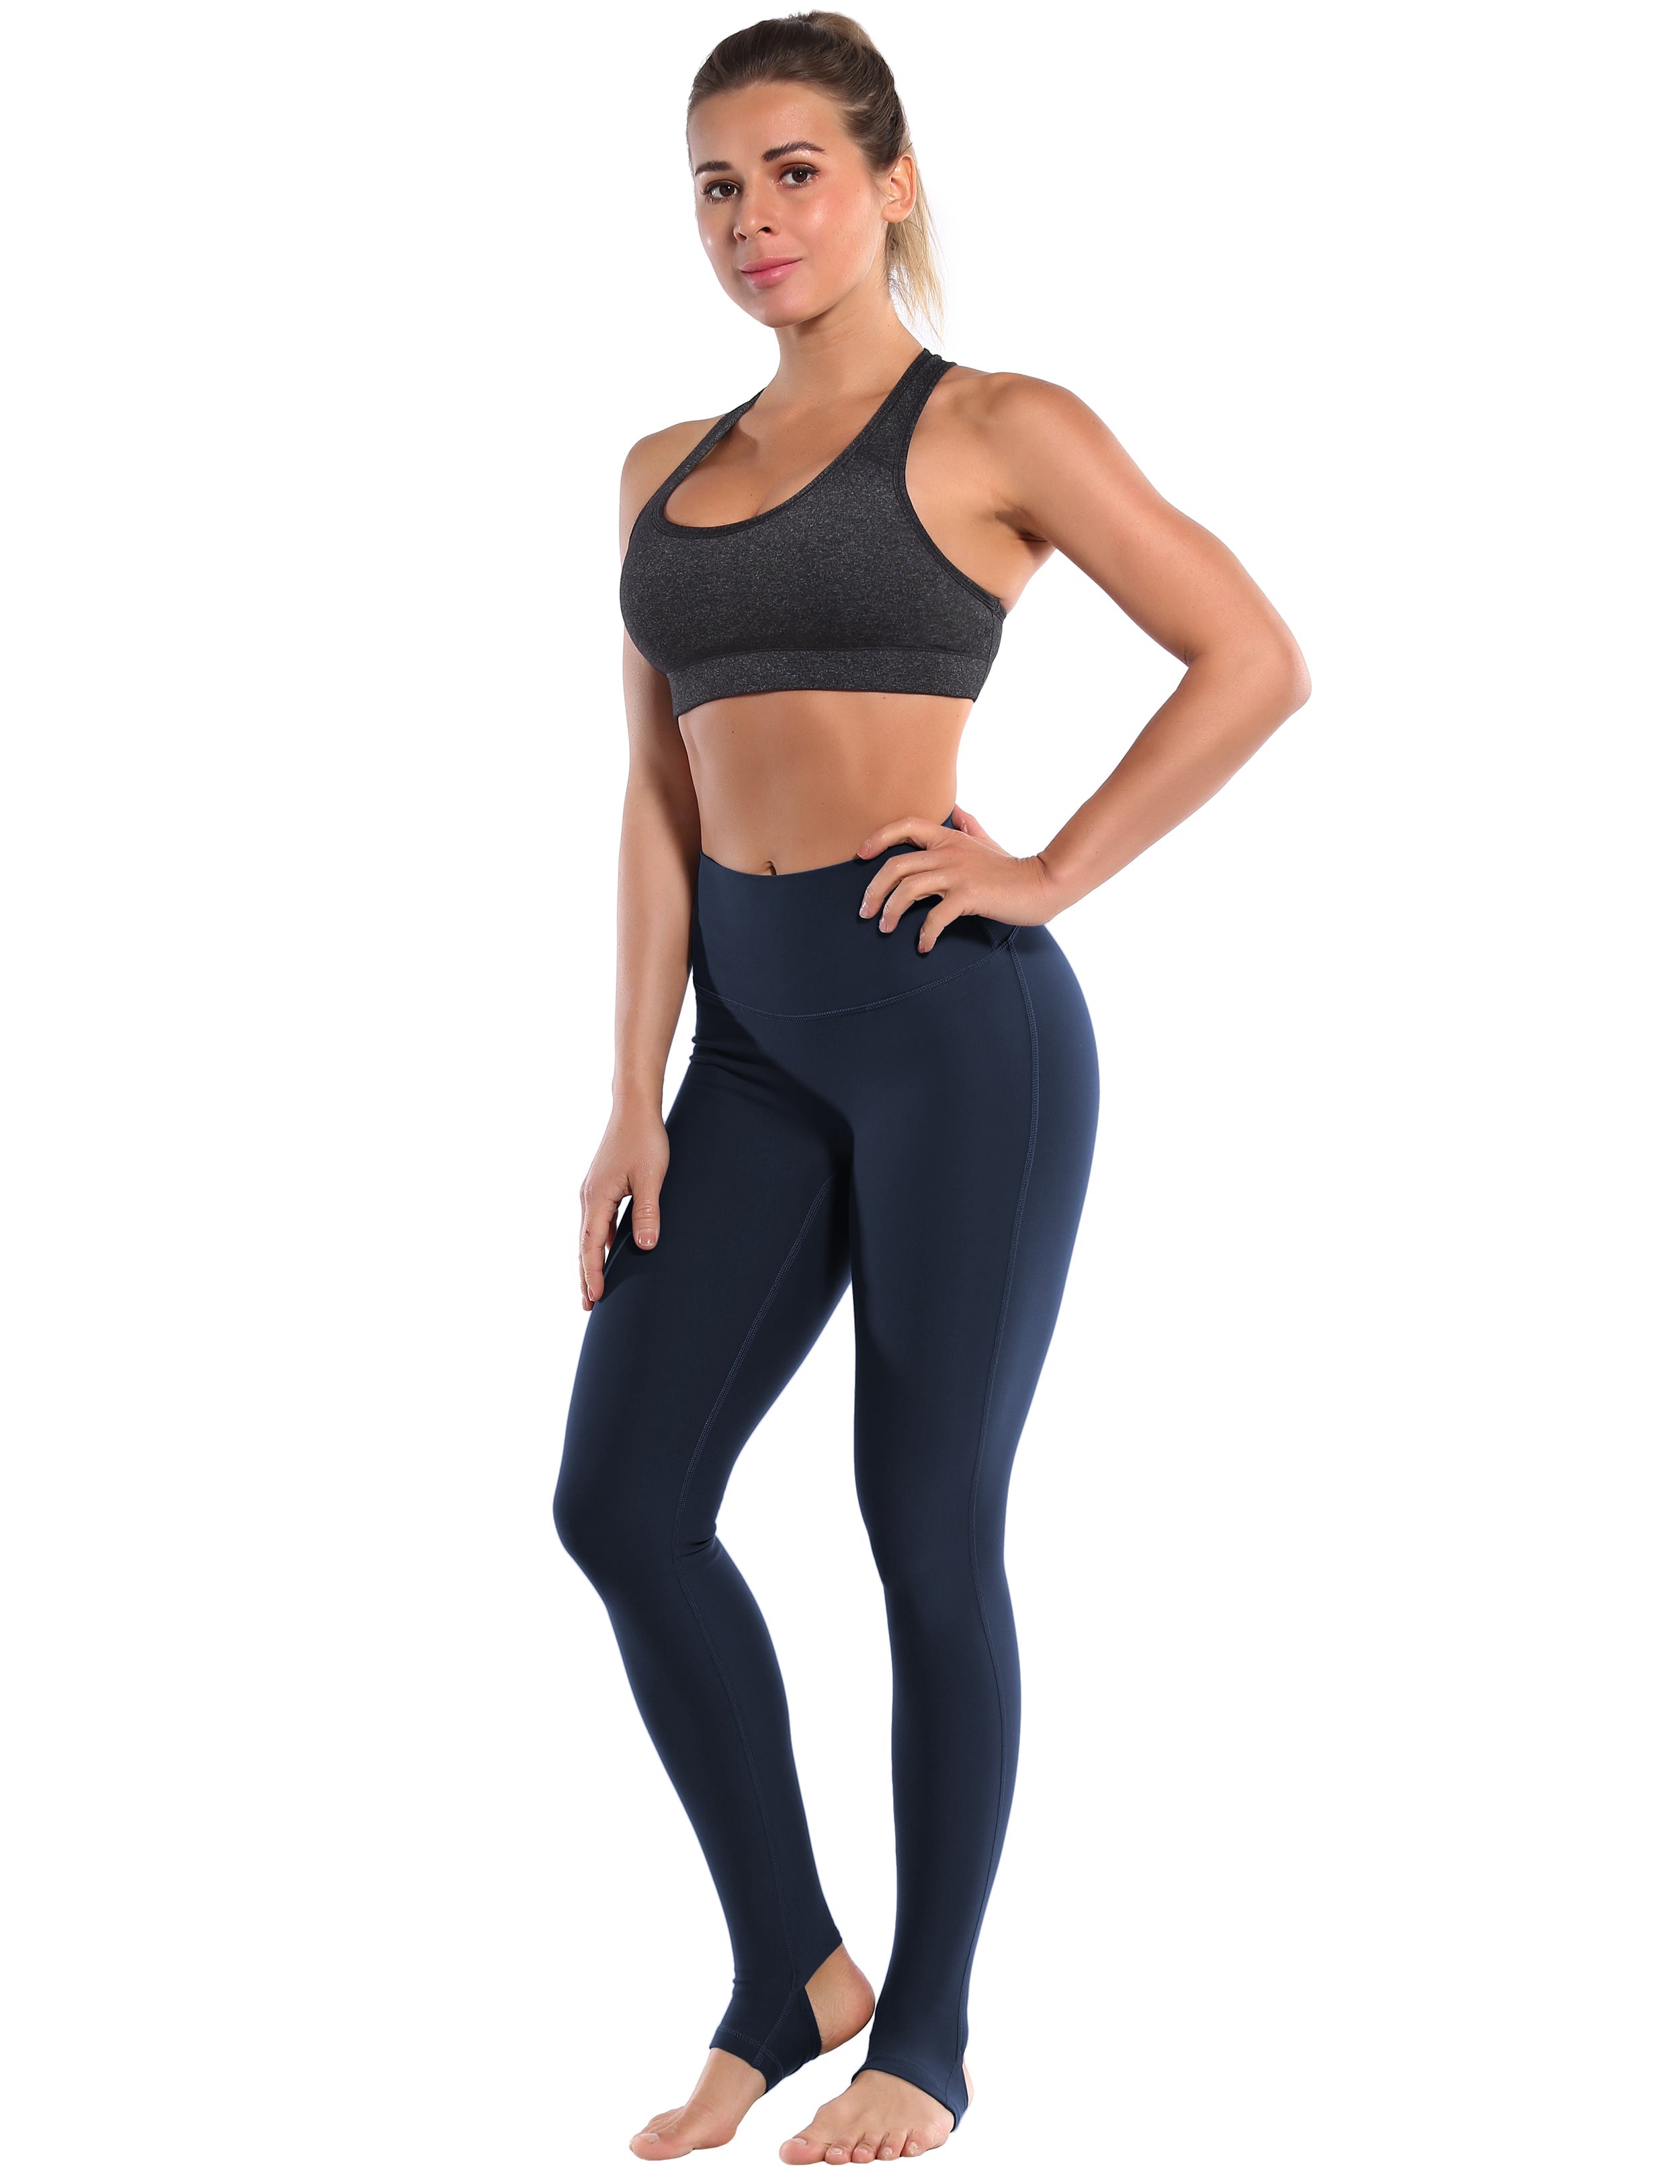 Over the Heel Golf Pants darknavy Over the Heel Design 87%Nylon/13%Spandex Fabric doesn't attract lint easily 4-way stretch No see-through Moisture-wicking Tummy control